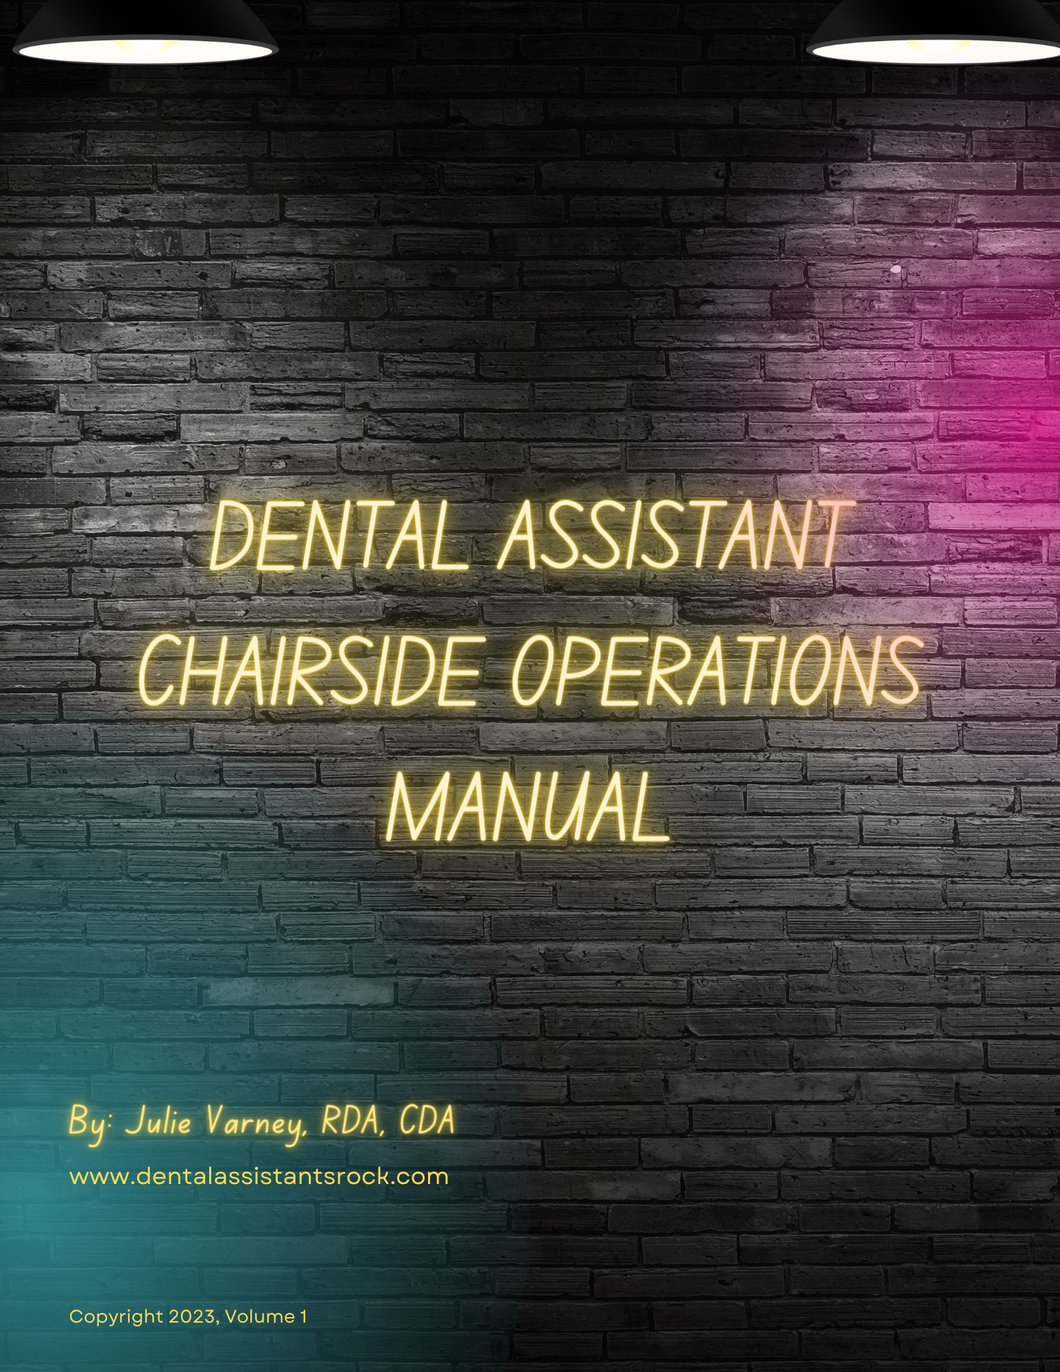 Dental Assistant Chairside Operations Manual (Fillable PDF)